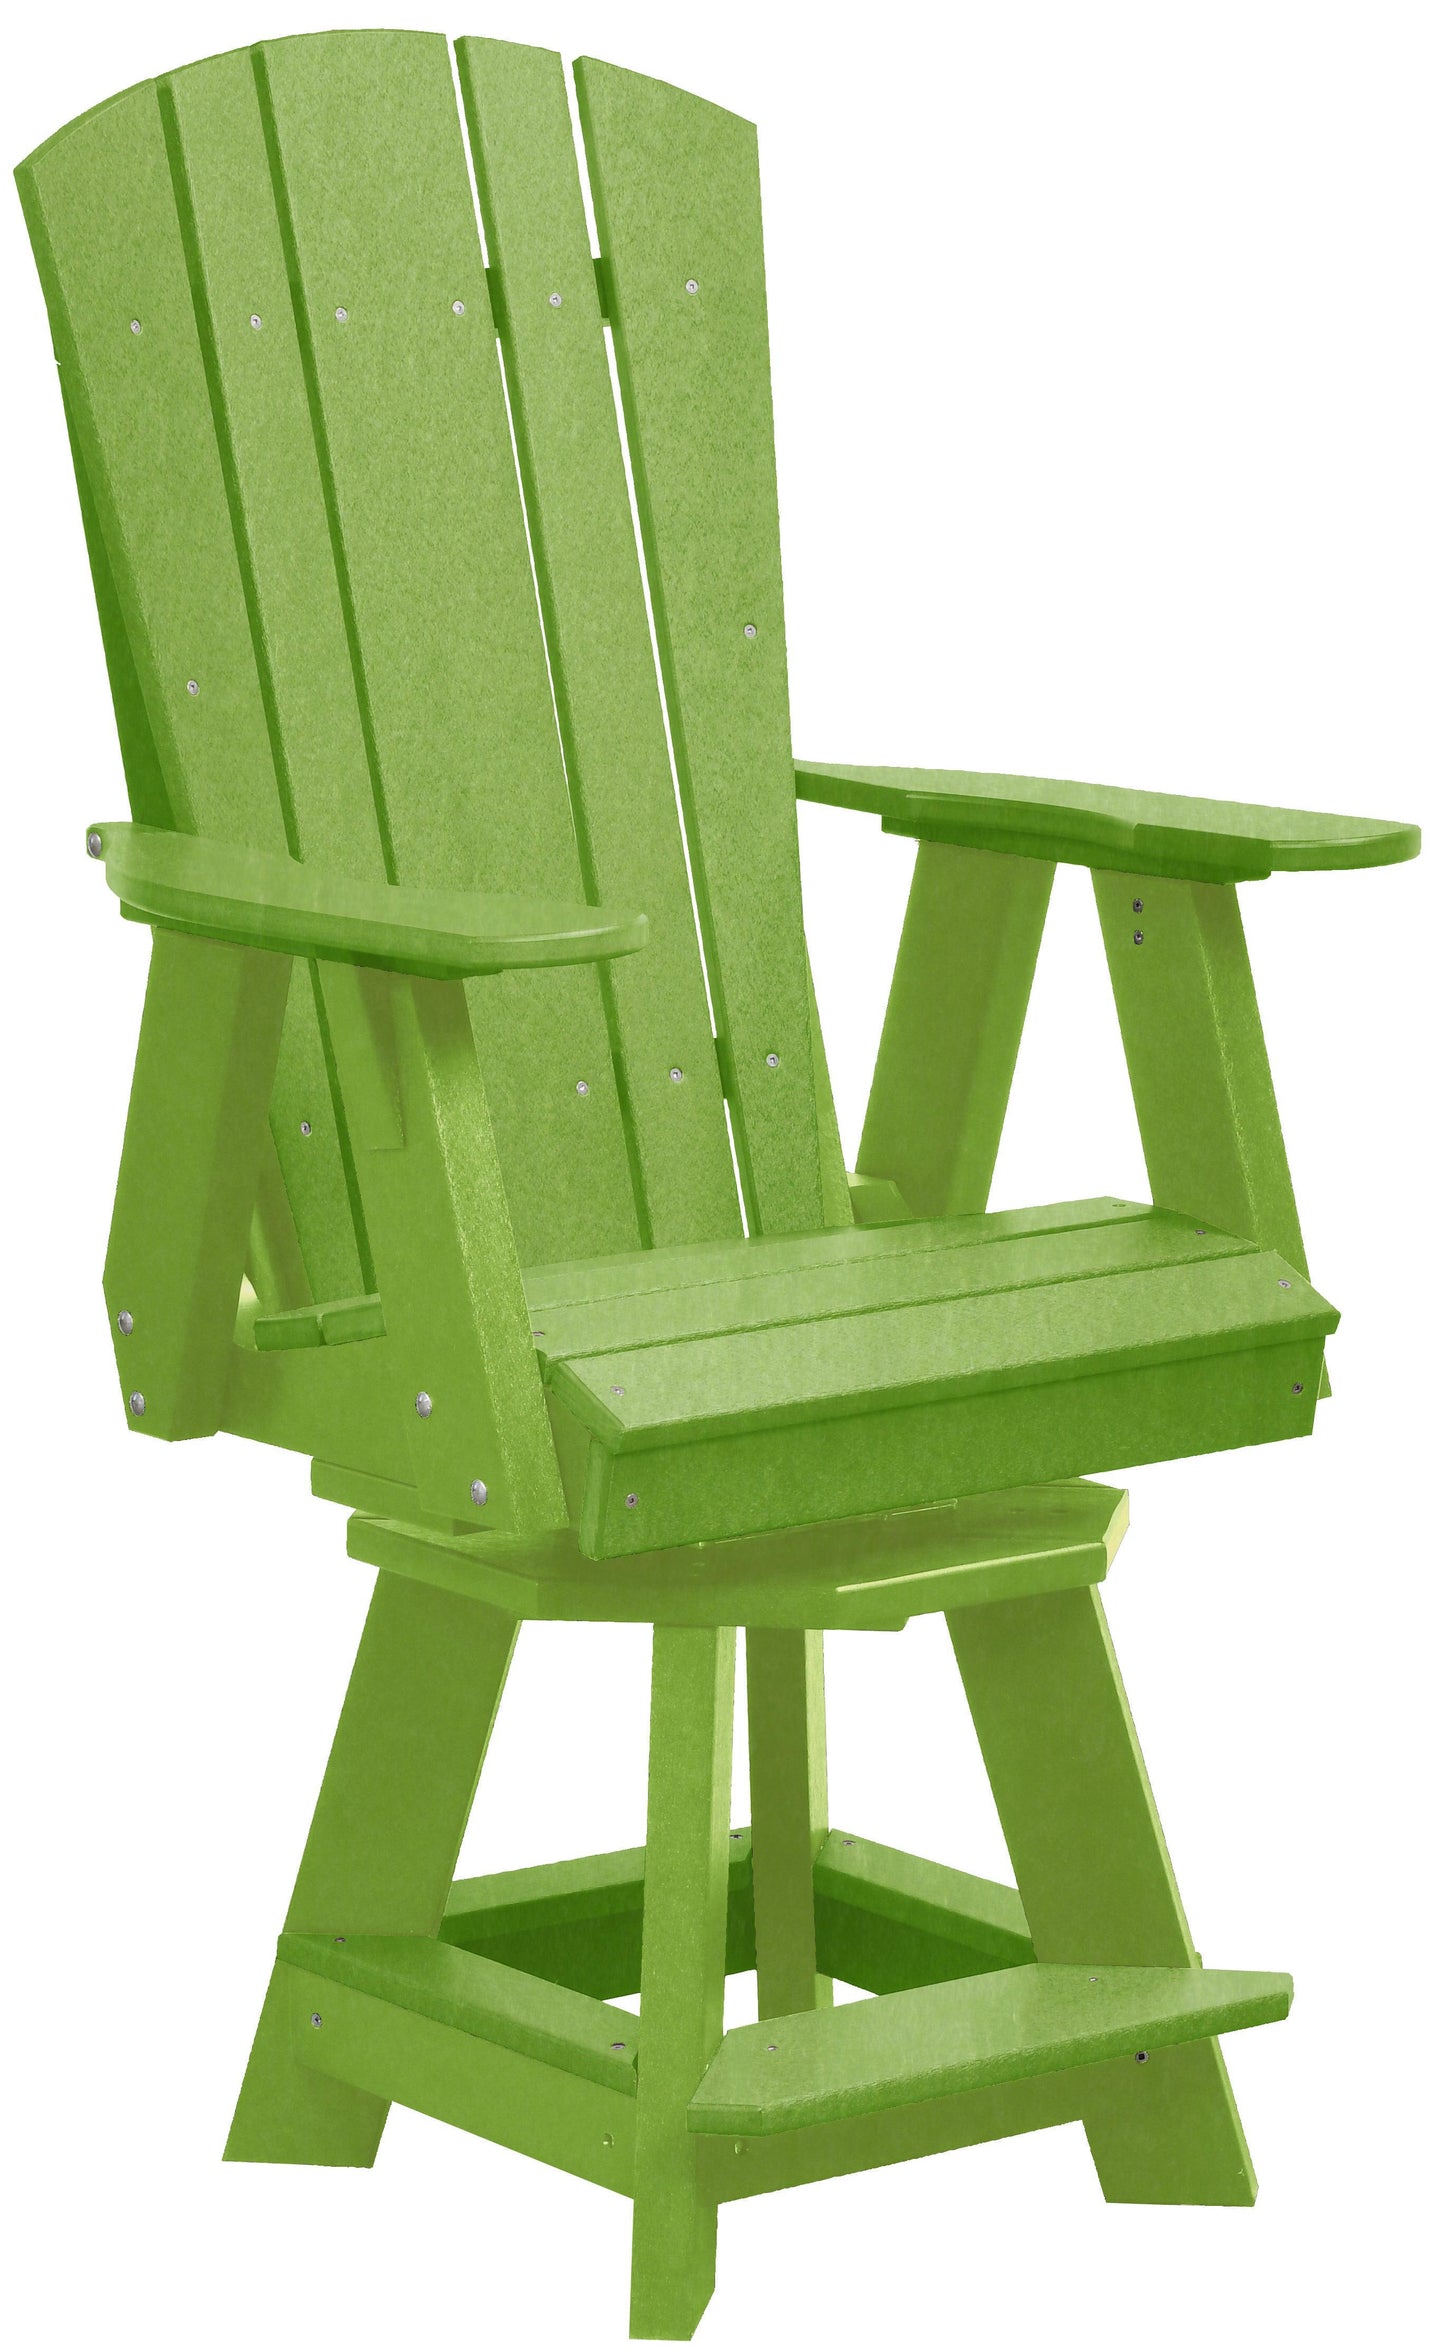 Wildridge Recycled Plastic Heritage Balcony Swivel Chair (Counter Height) - LEAD TIME TO SHIP 6 WEEKS OR LESS